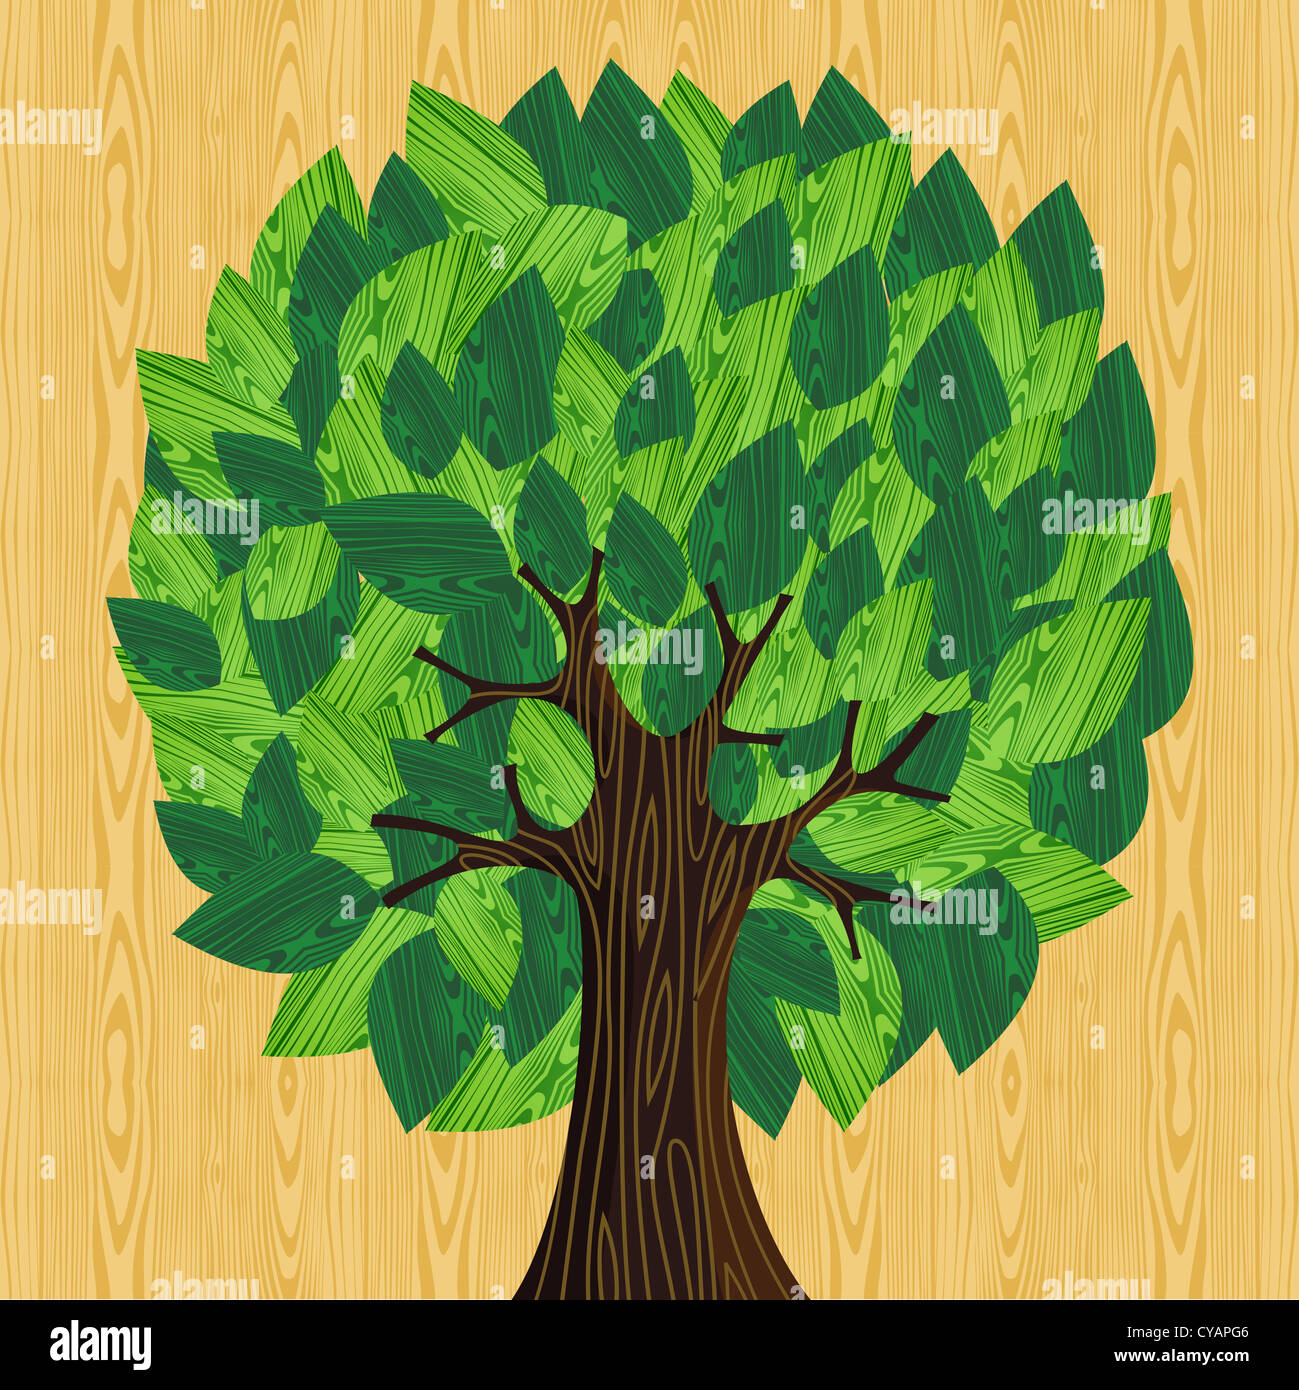 Eco friendly tree with green wooden leaves illustration. Vector file layered for easy manipulation and custom coloring. Stock Photo